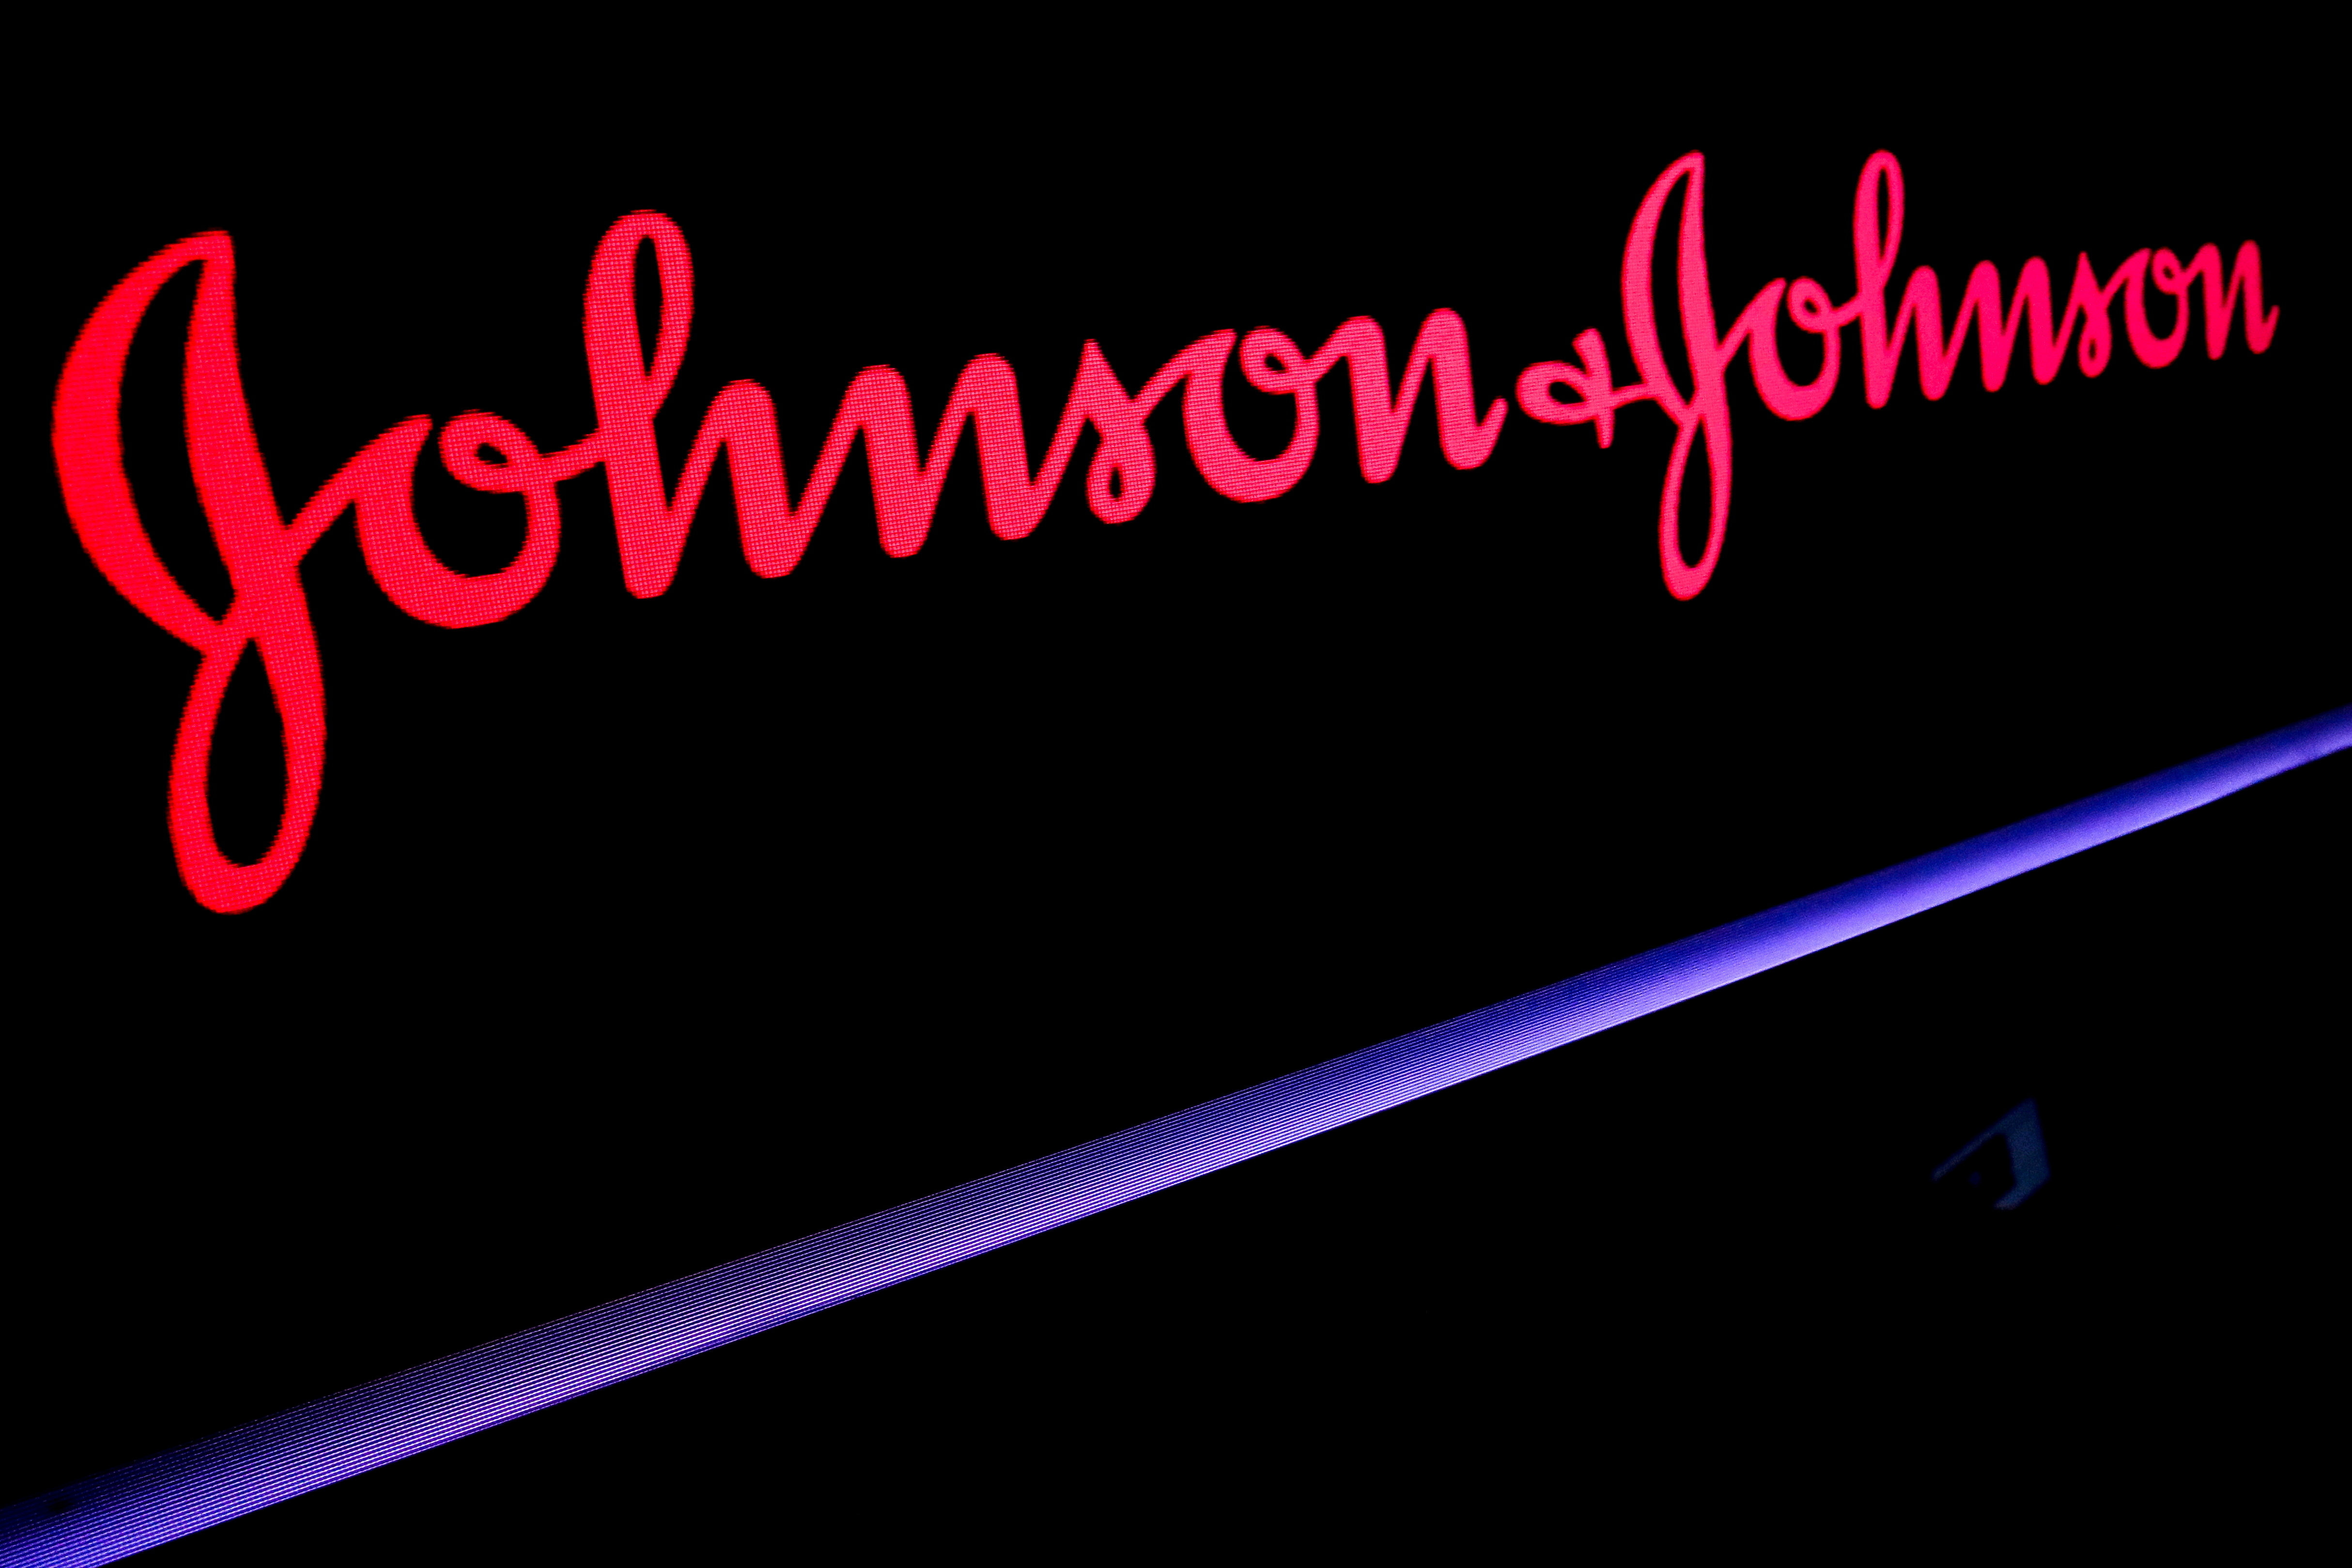 FILE PHOTO: The Johnson & Johnson logo is displayed on a screen on the floor of the NYSE in New York